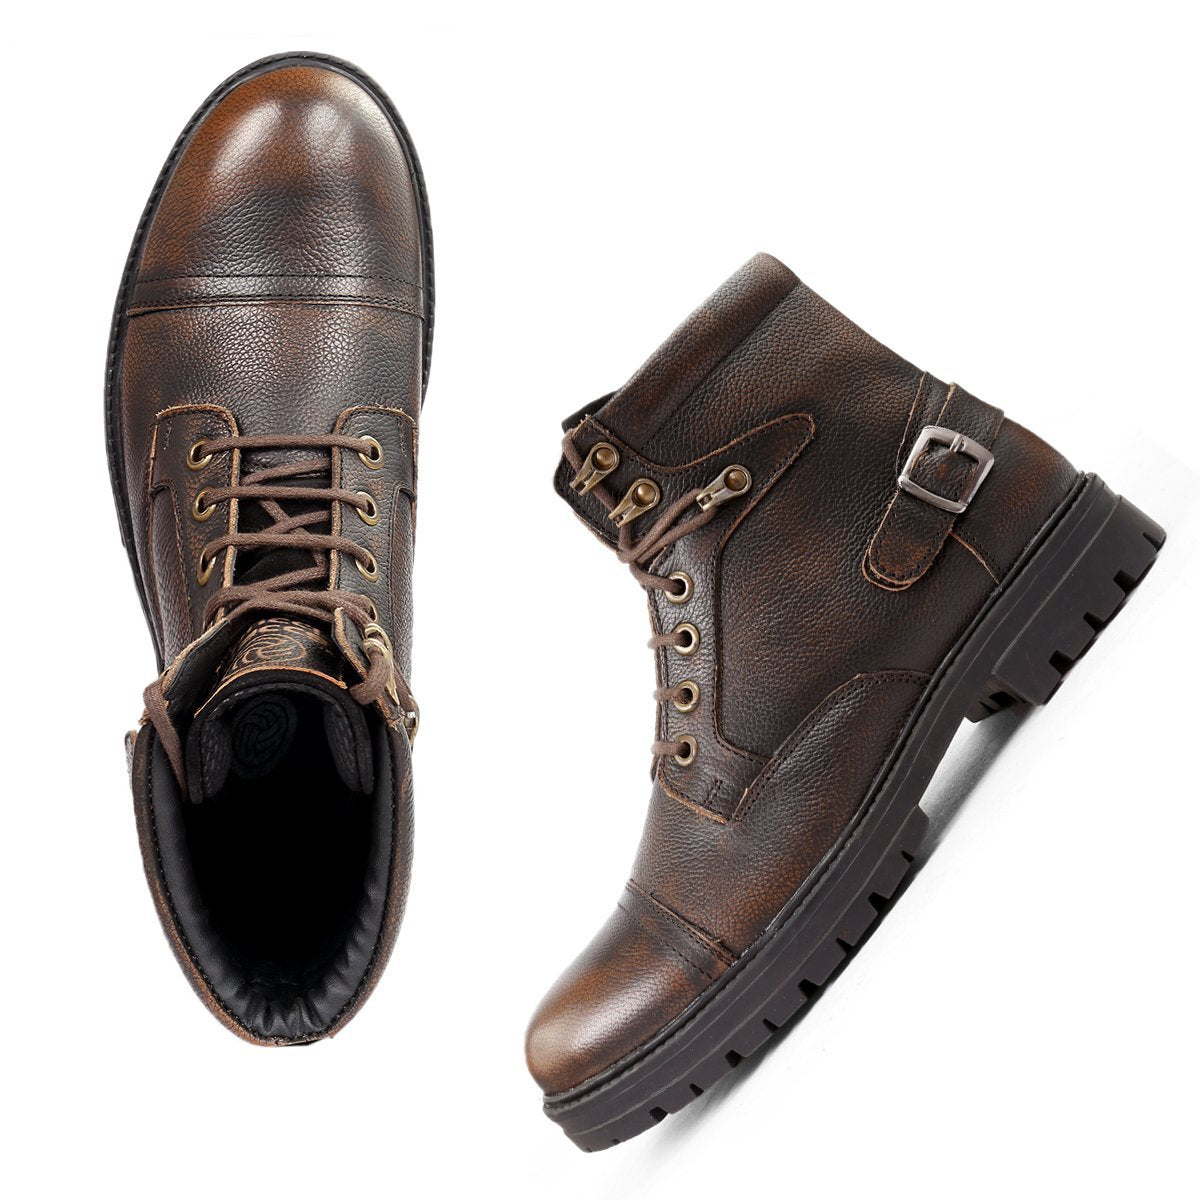 derby boots men, men chukka boots, genuine leather boots, brown  leather boots, motorcycle boots, biking boots, water resistant boots